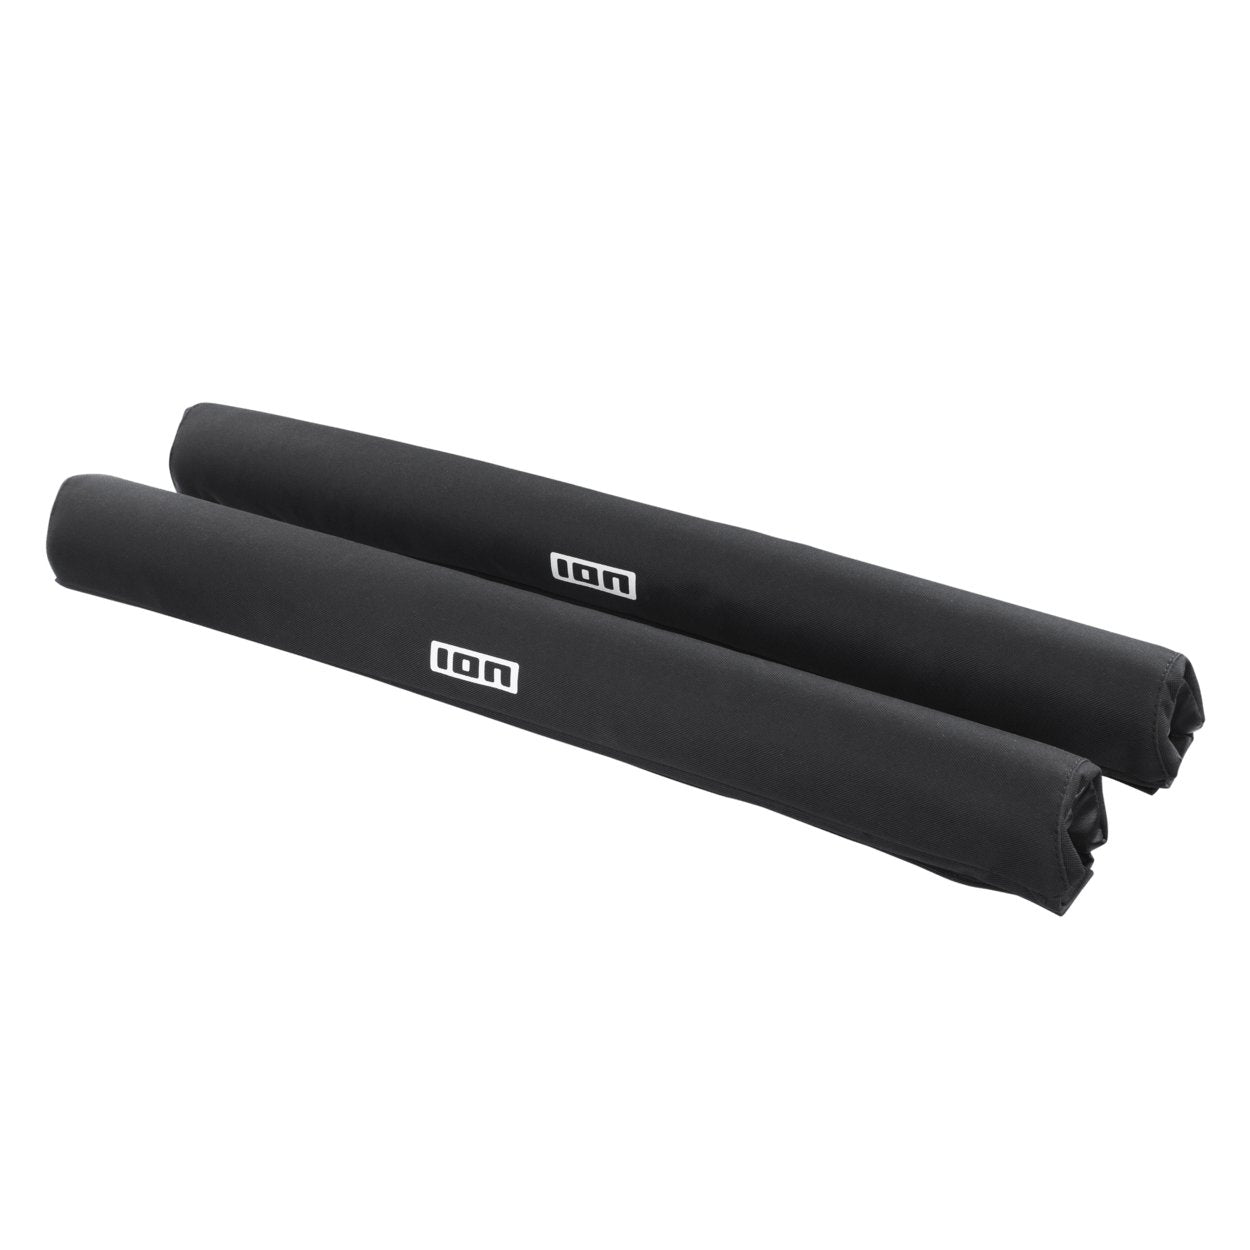 ION Roof Rack Pads 40 2022 - Worthing Watersports - 9008415558629 - Accessories - ION Water